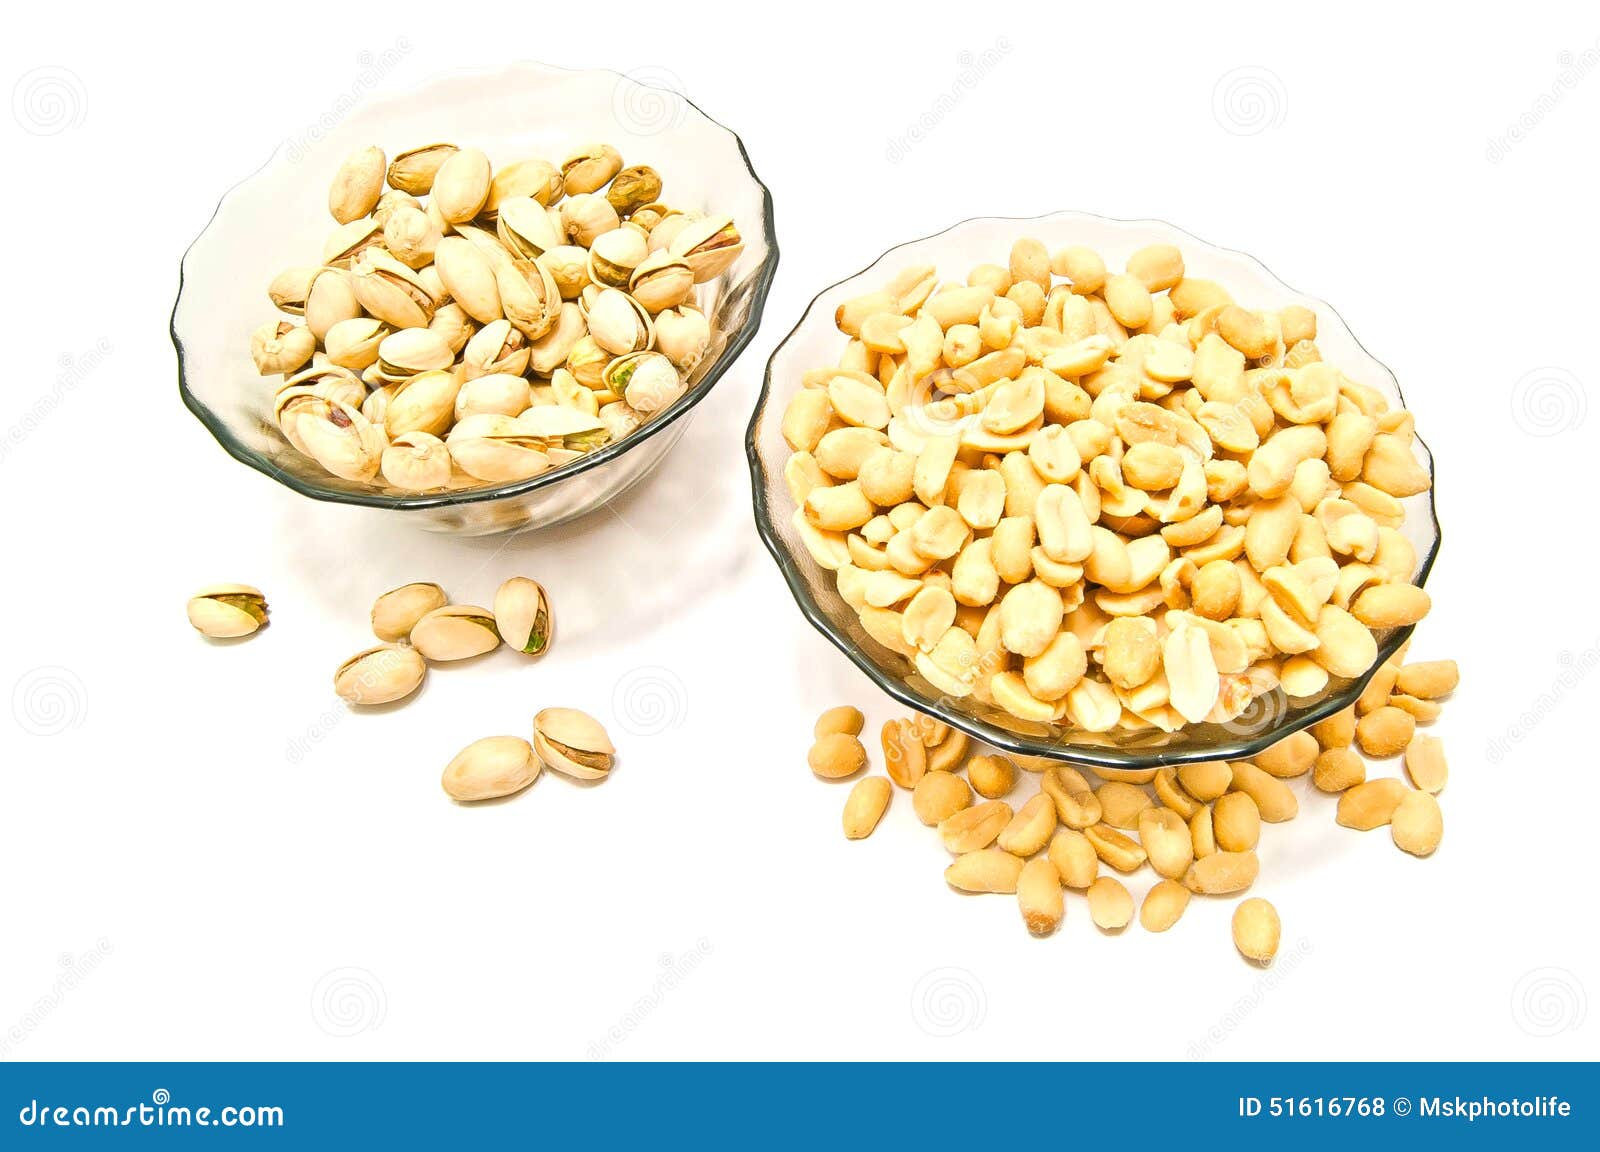 two plate with different nuts